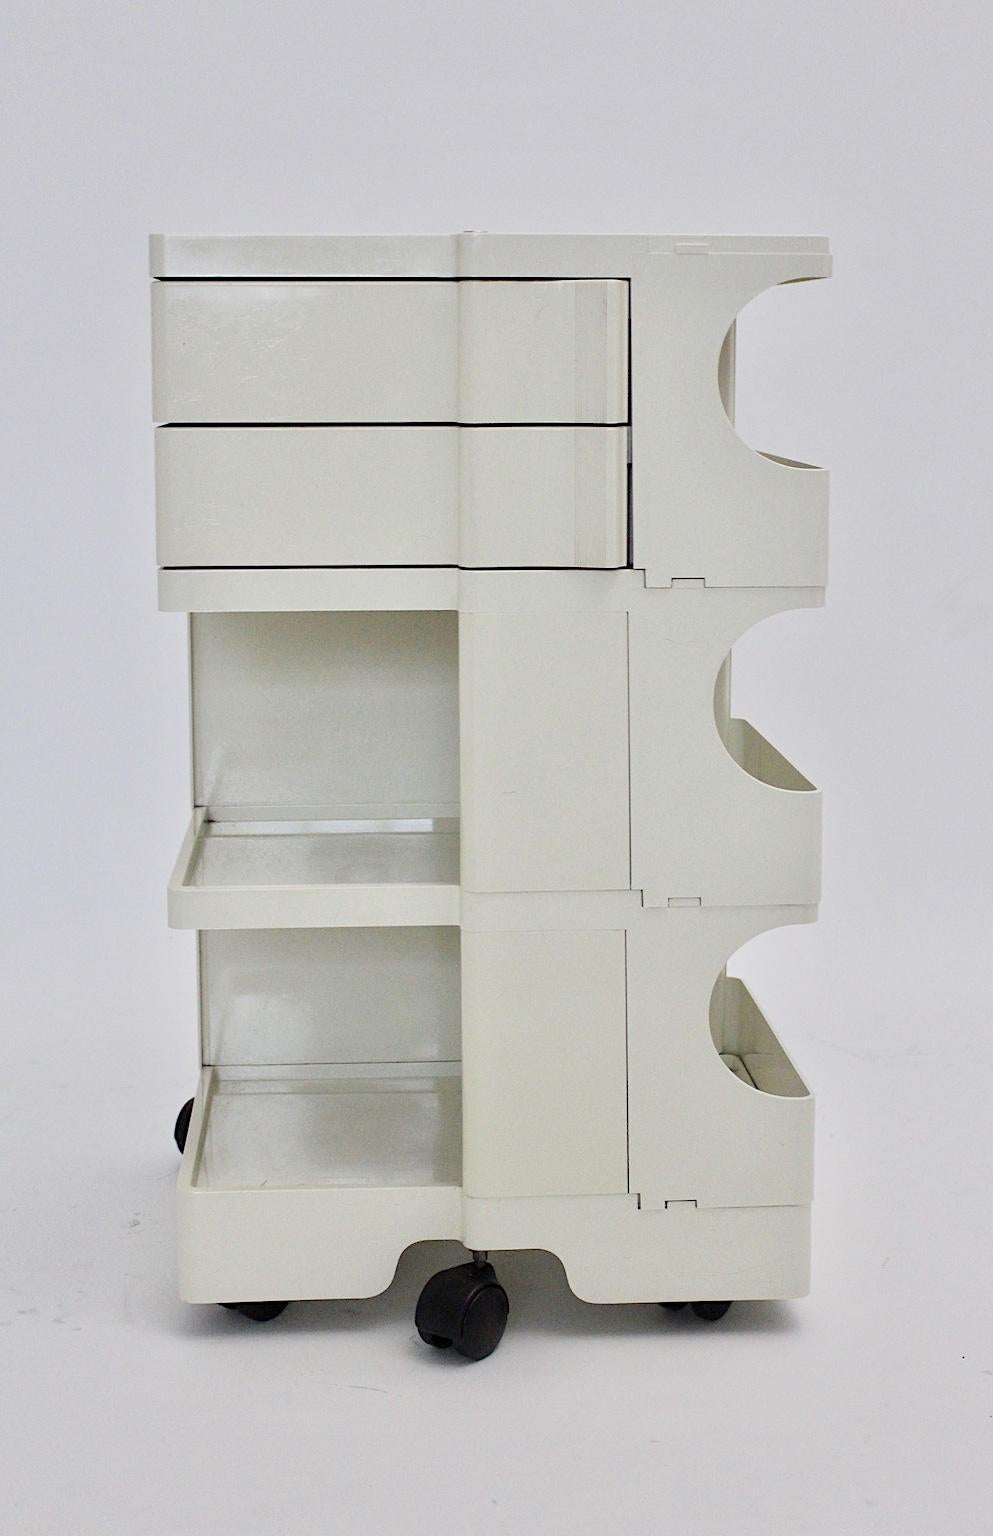 A white vintage 3 high portable storage container, which was designed by Joe Colombo in 1969, Italy and executed by Bieffeplast, Padova, Italy. The white Joe Colombo Boby storage container was made of white plastic and features 2 drawers and